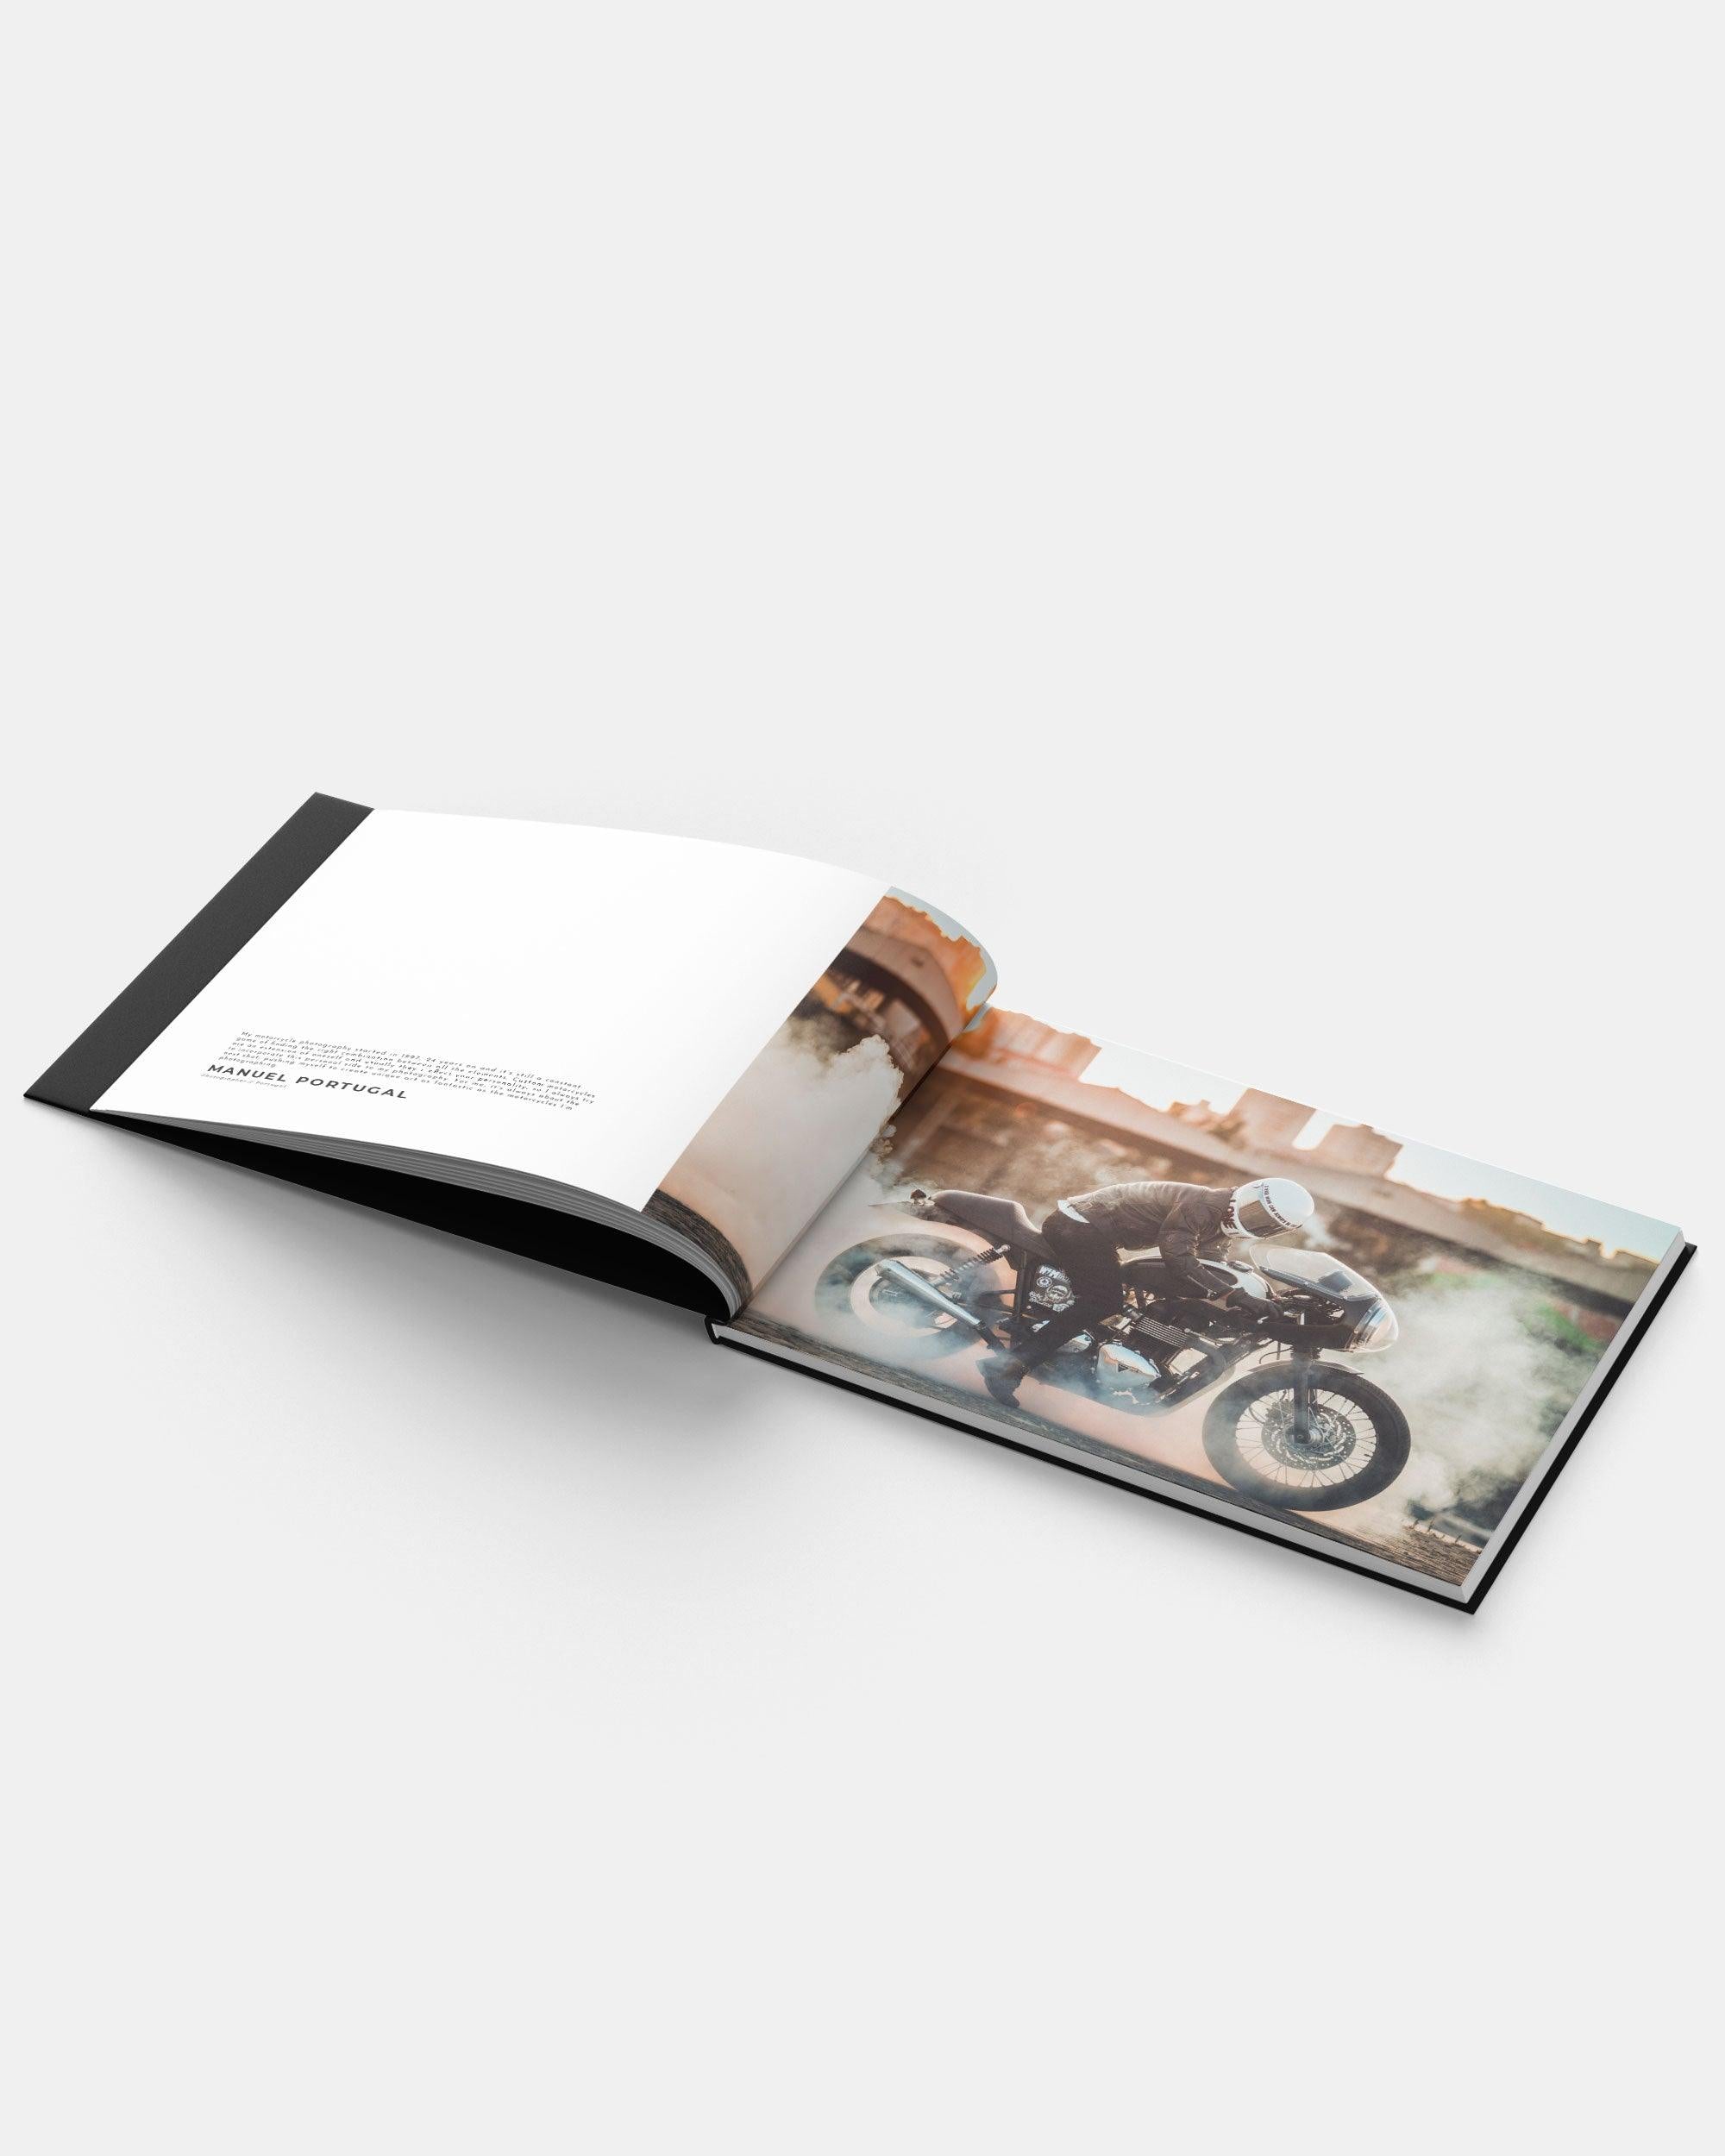 The Racer Within | Motorcycle Photo Book Merla Moto